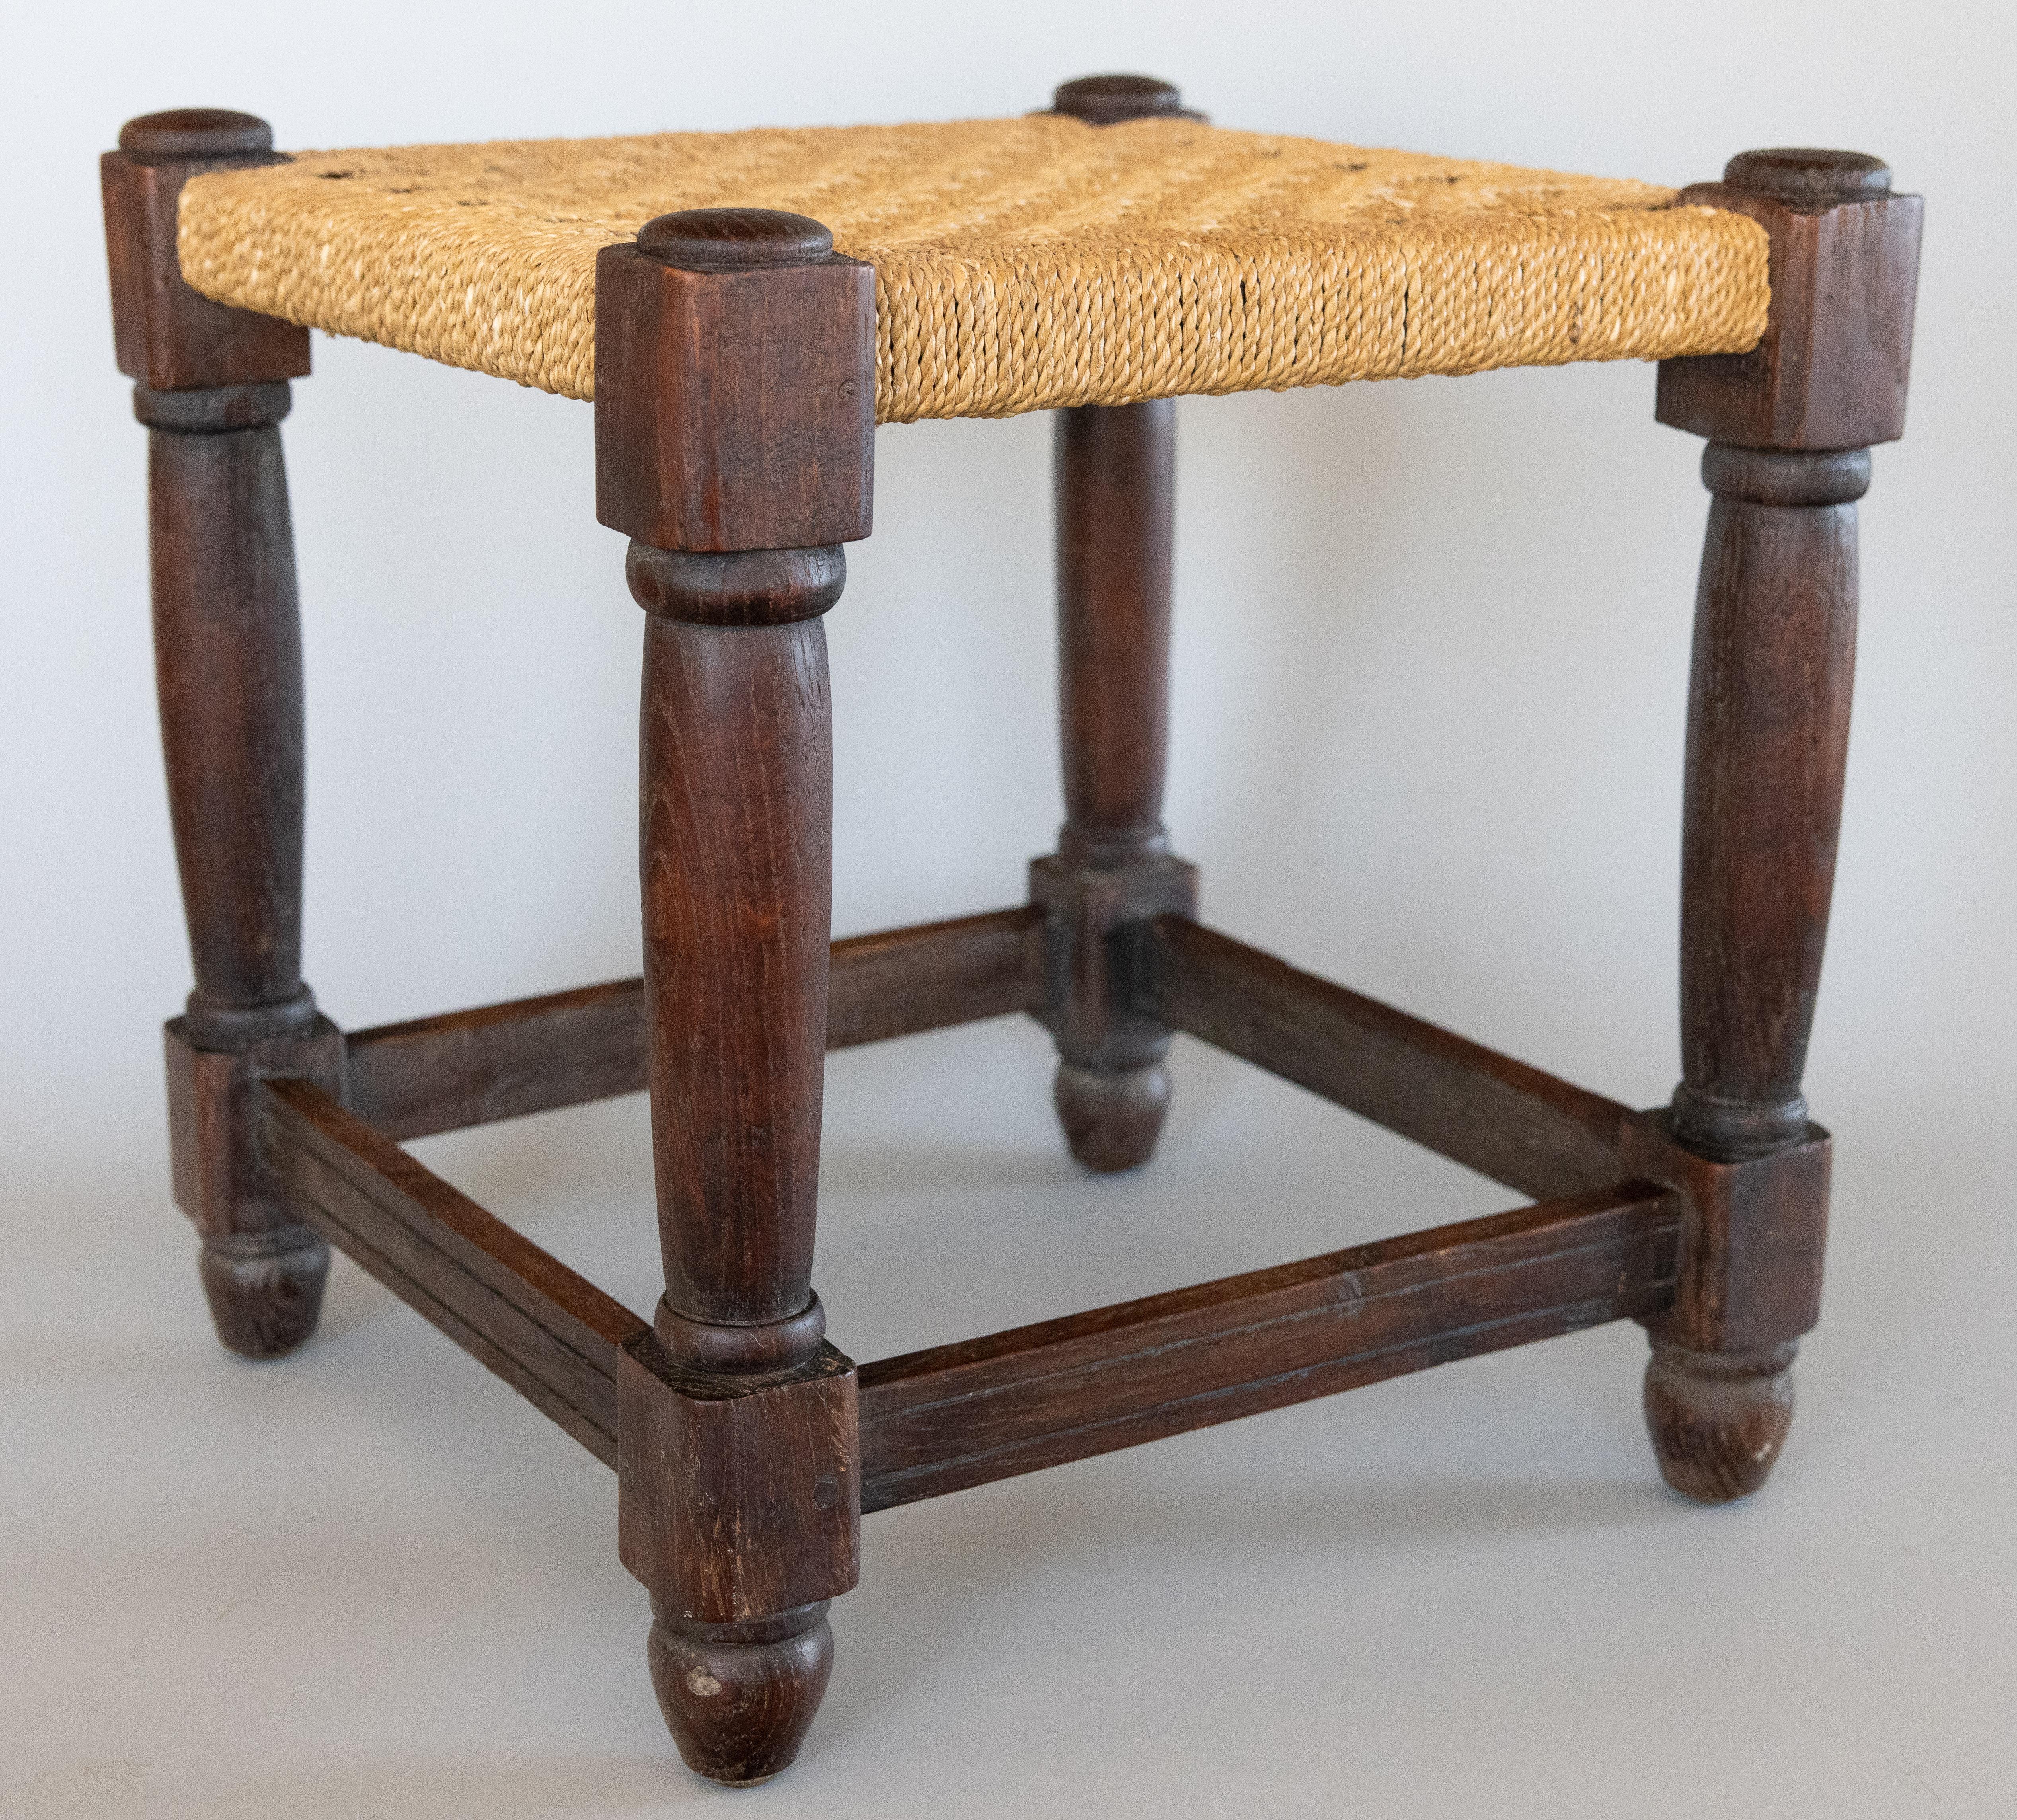 20th Century Antique English Oak Woven Cord Rope Stool Footstool, circa 1900 For Sale